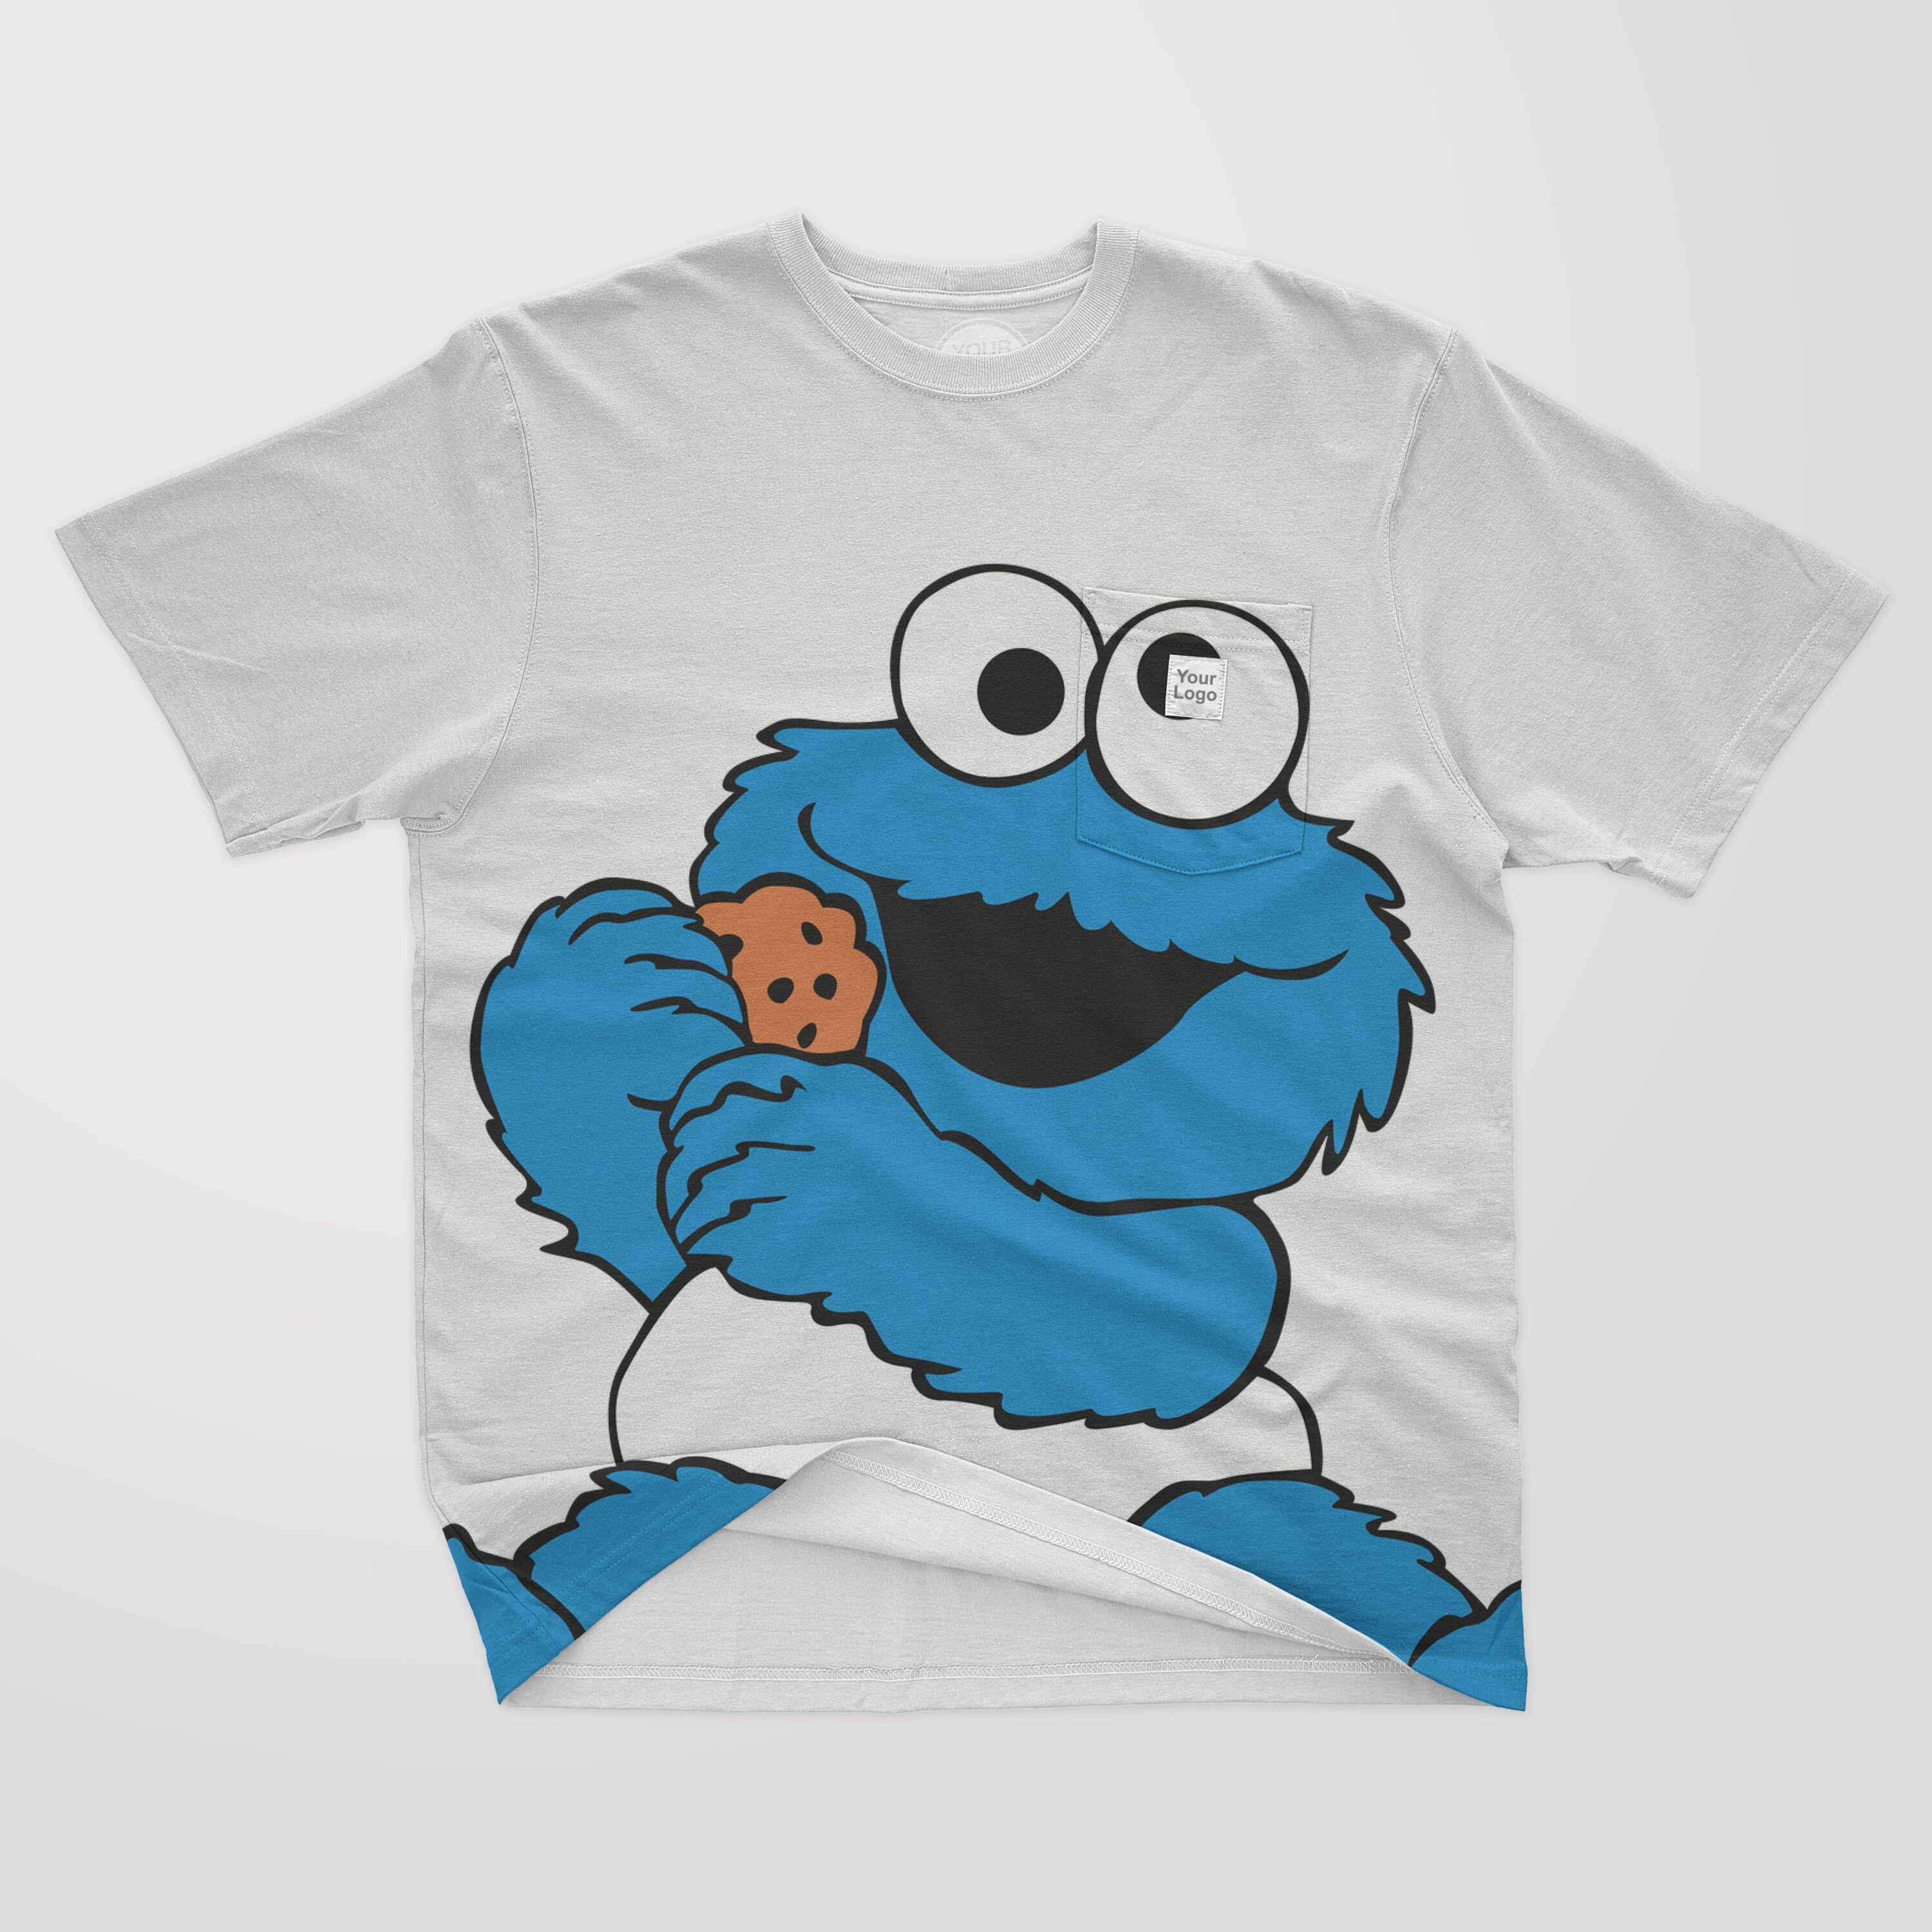 White t-shirt with a picture of a blue baby Cookie Monster, holding a cookie.